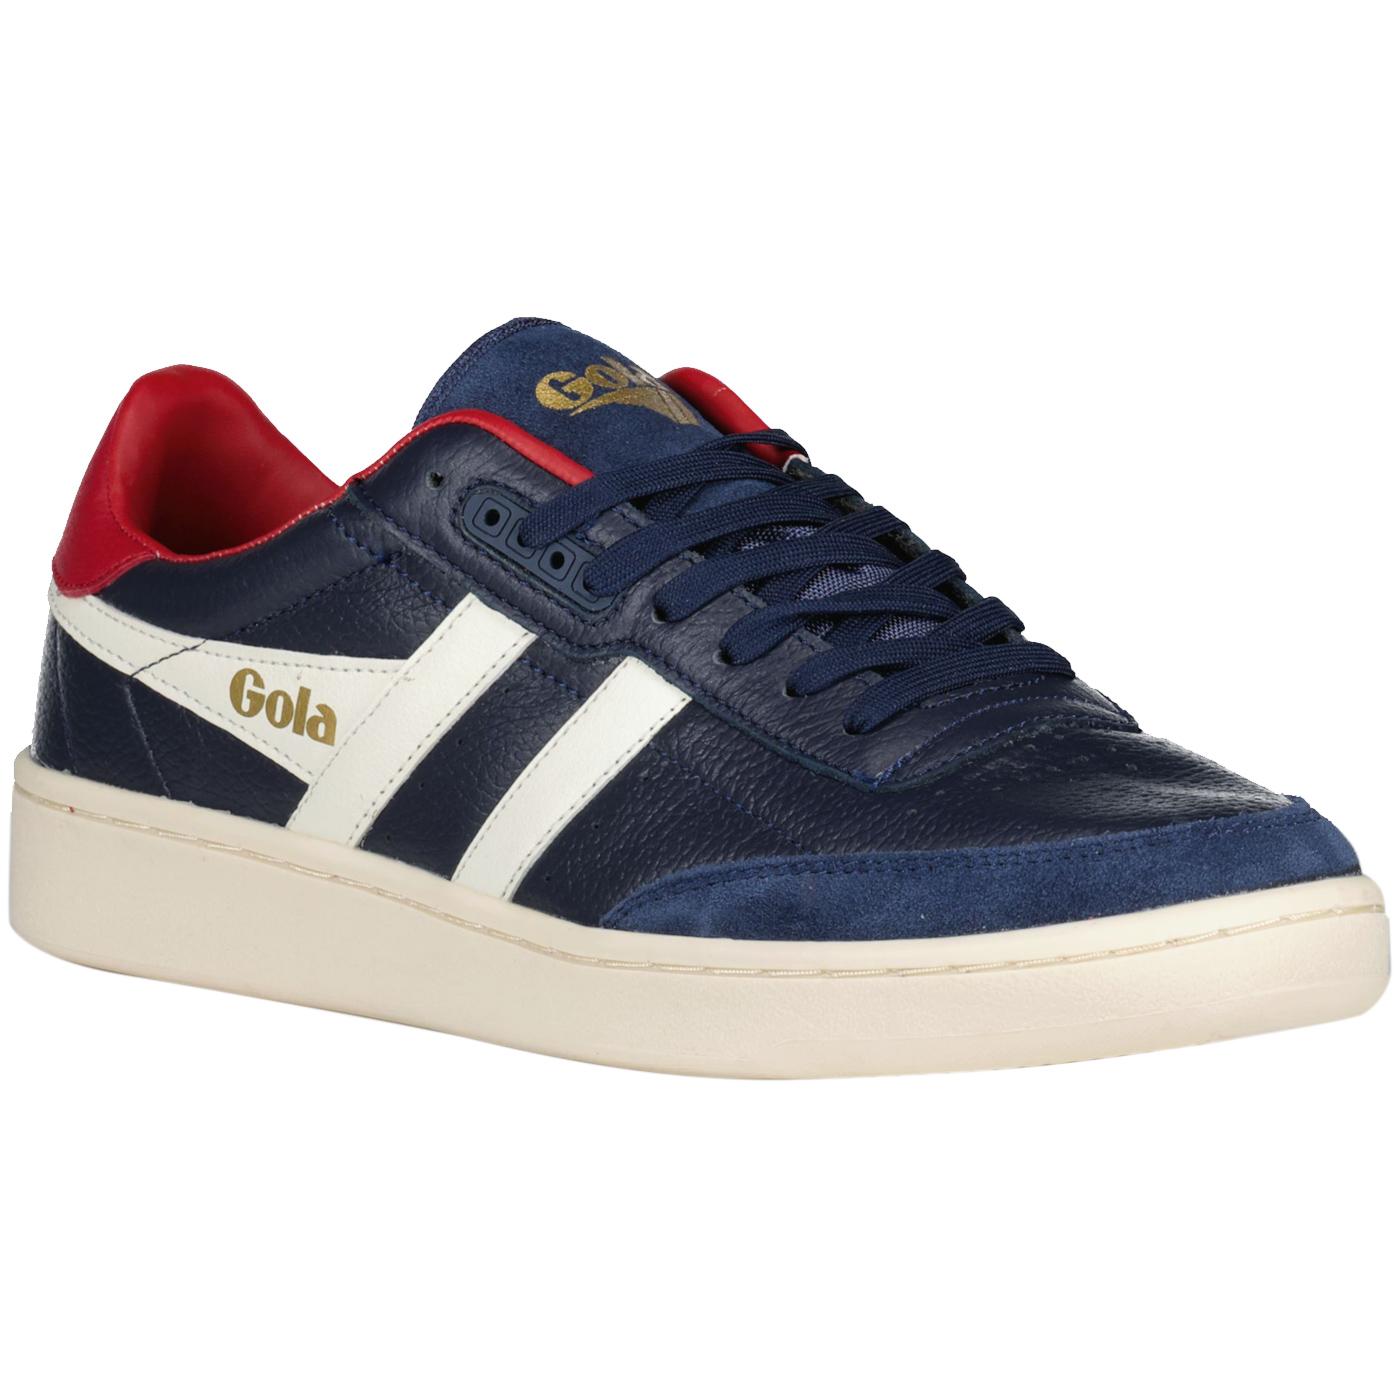 Contact Gola Classics Retro Leather Trainers N/W/R